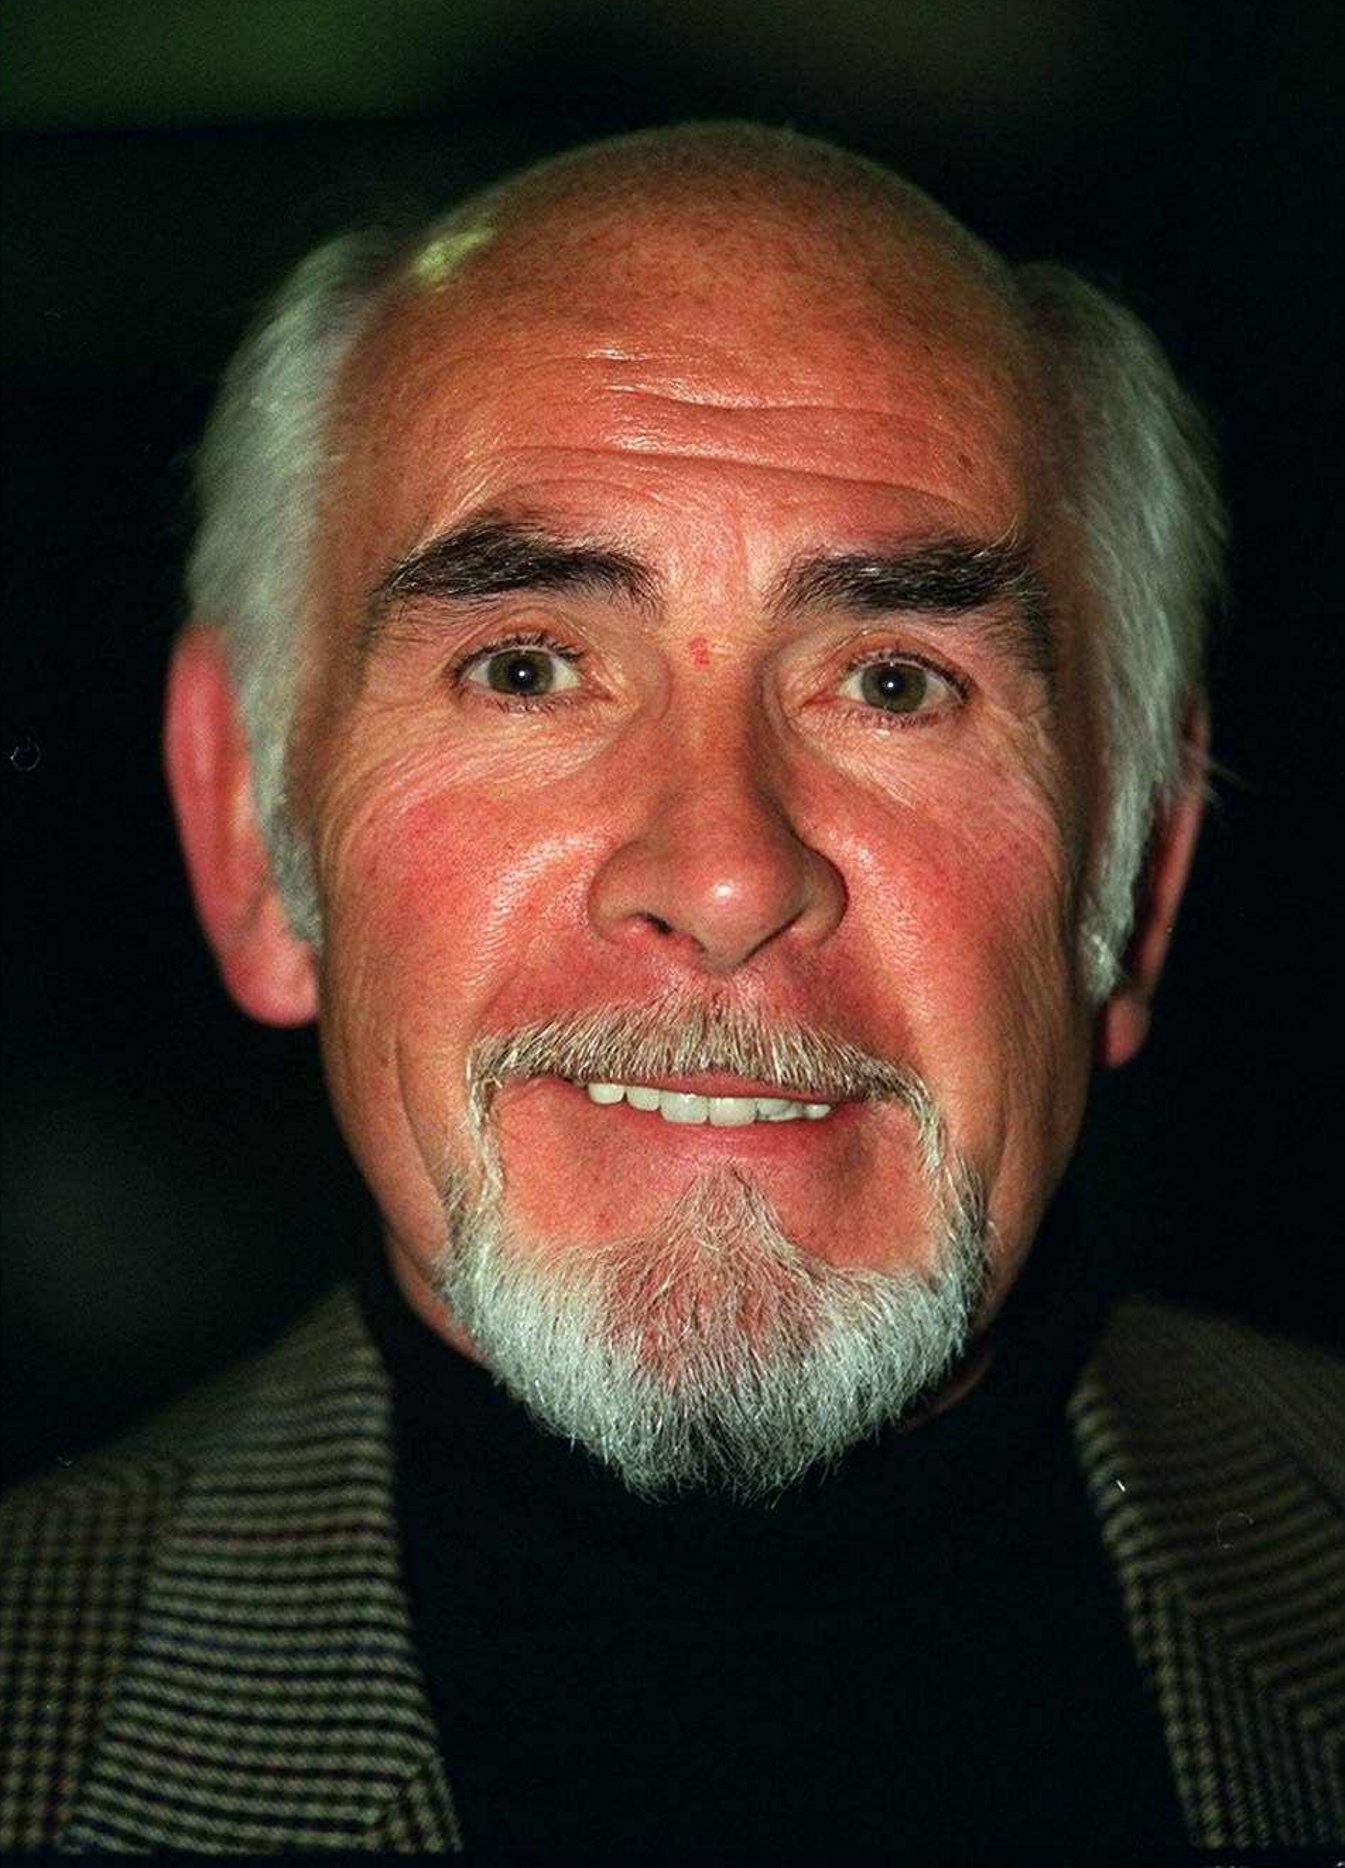 Neil Connery brother of actor Sean Connery with beard April 1997 (Photo by mirrorpix/Mirrorpix/Mirrorpix via Getty Images) (Foto: Mirrorpix via Getty Images)